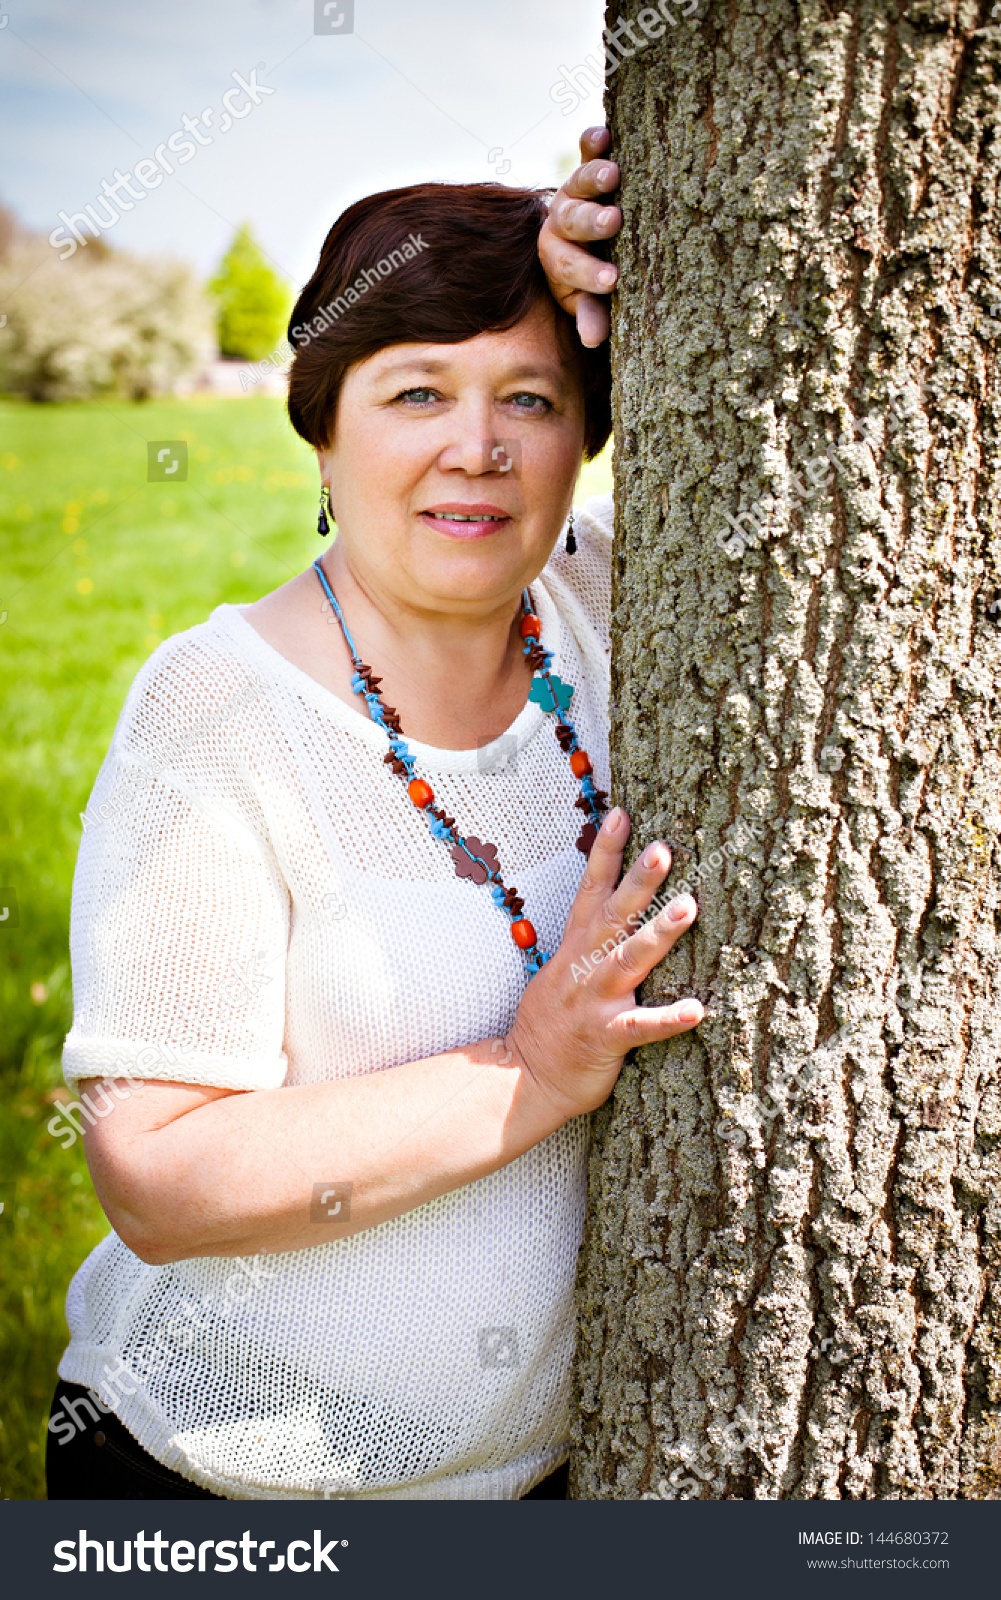 Portrait Of A Happy Old Woman Holding A Tree In Outdoor Background ...